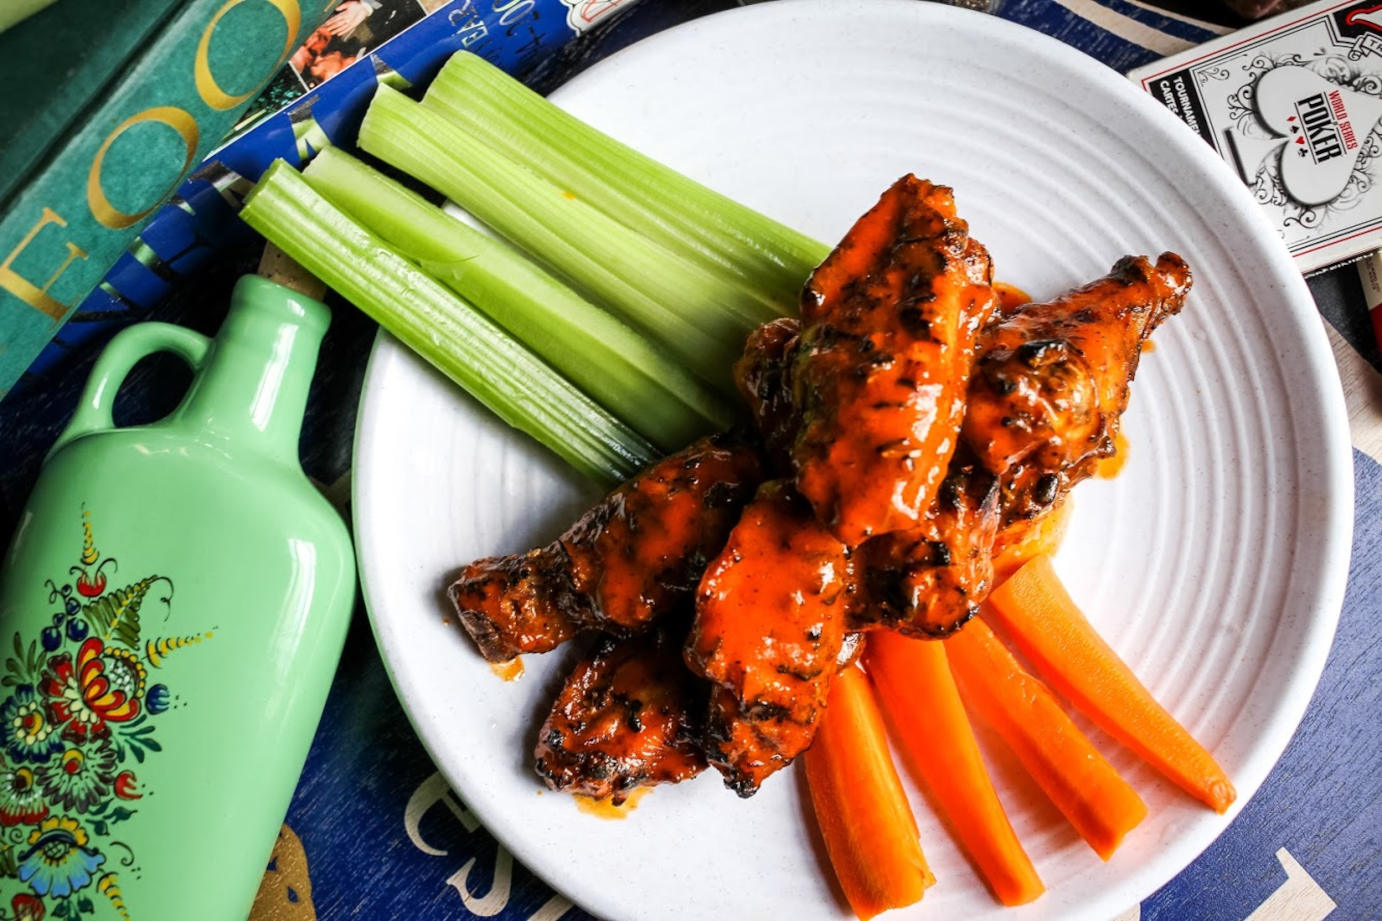 Grilled chicken, cucumber and carrots on the side